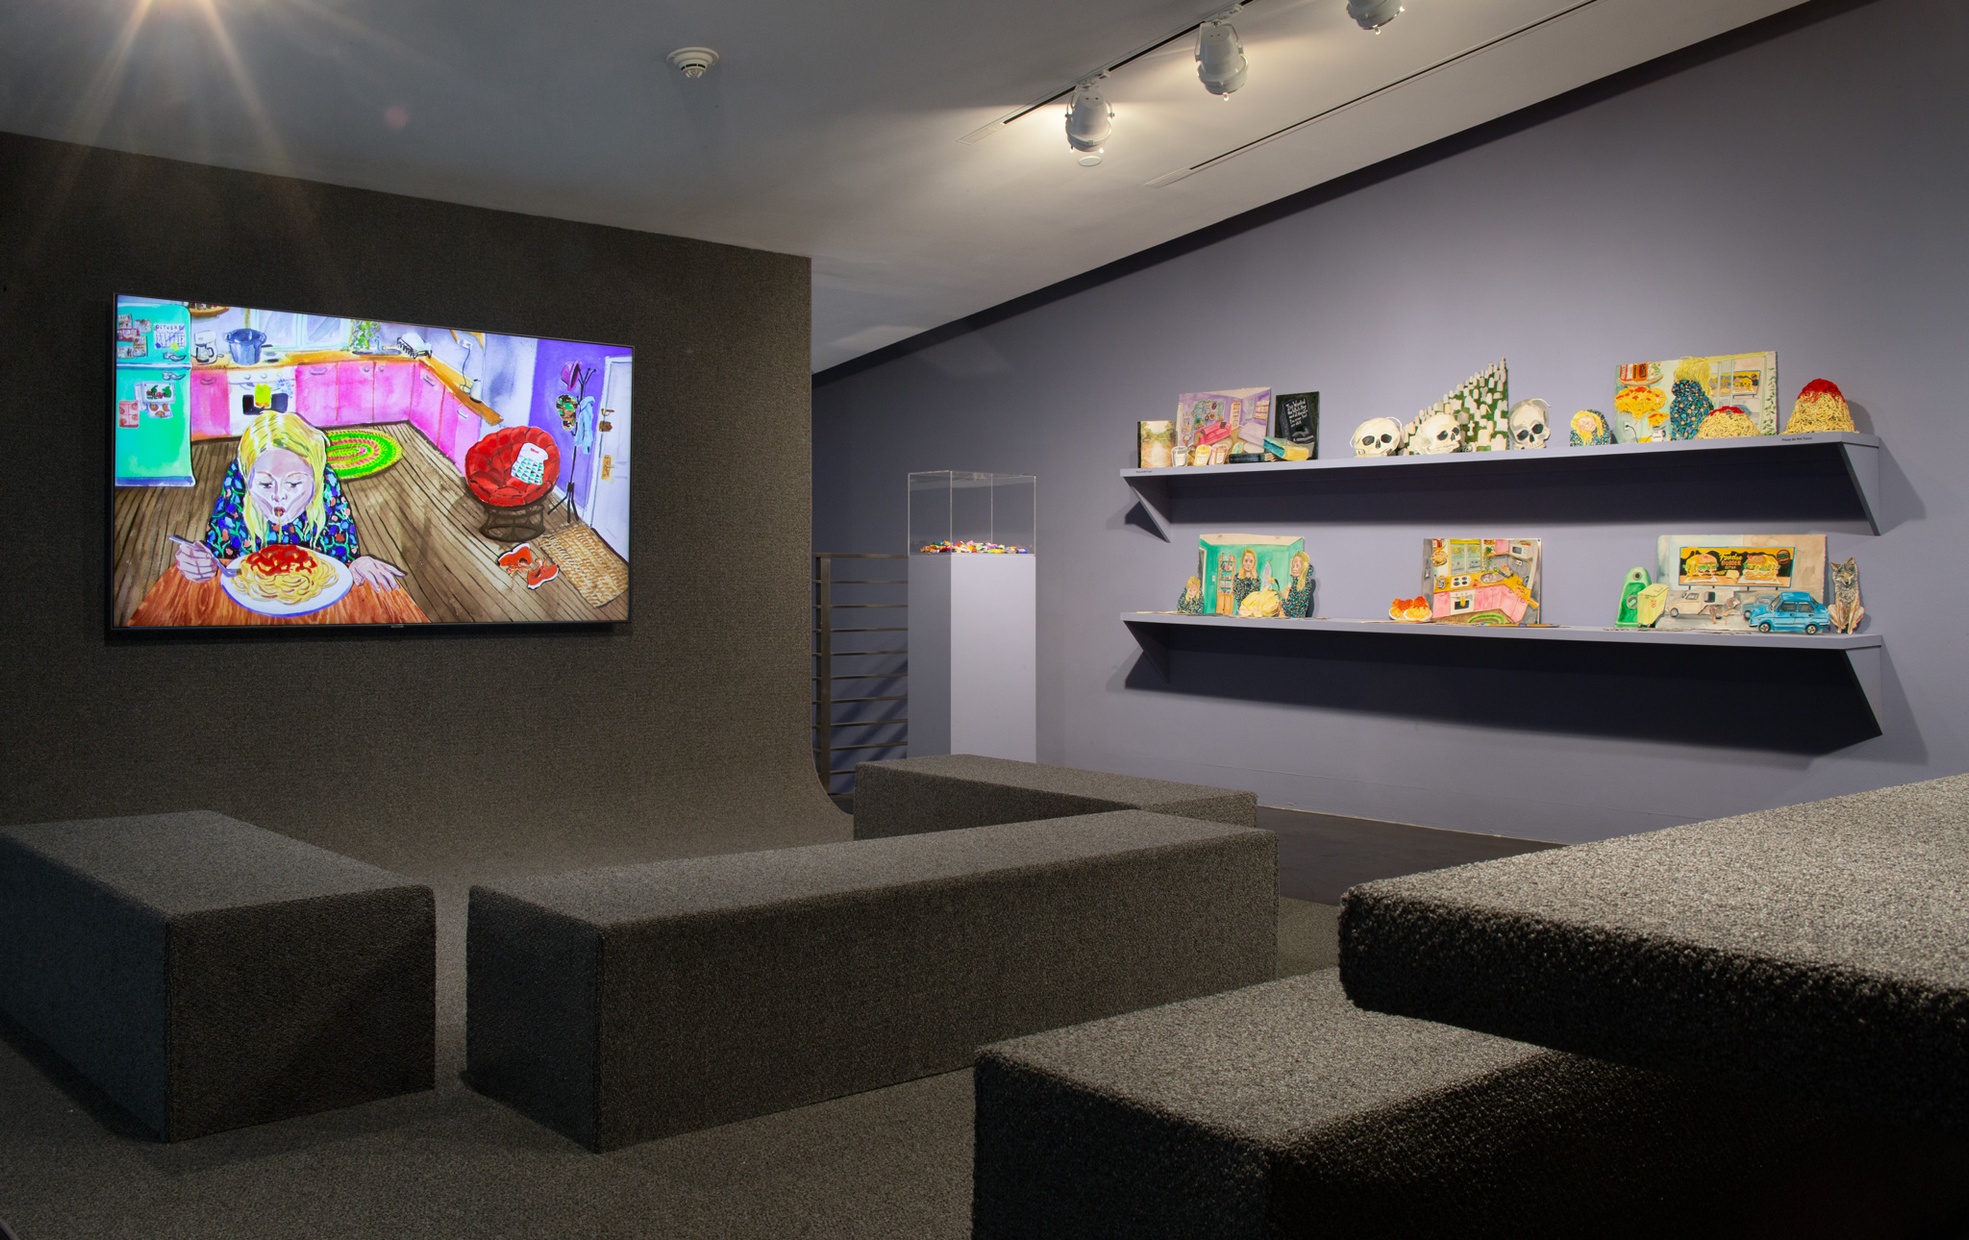 A gallery features gray carpeted floor and seating with a video animation playing on one wall and shelves displaying painted paper artworks on the other.